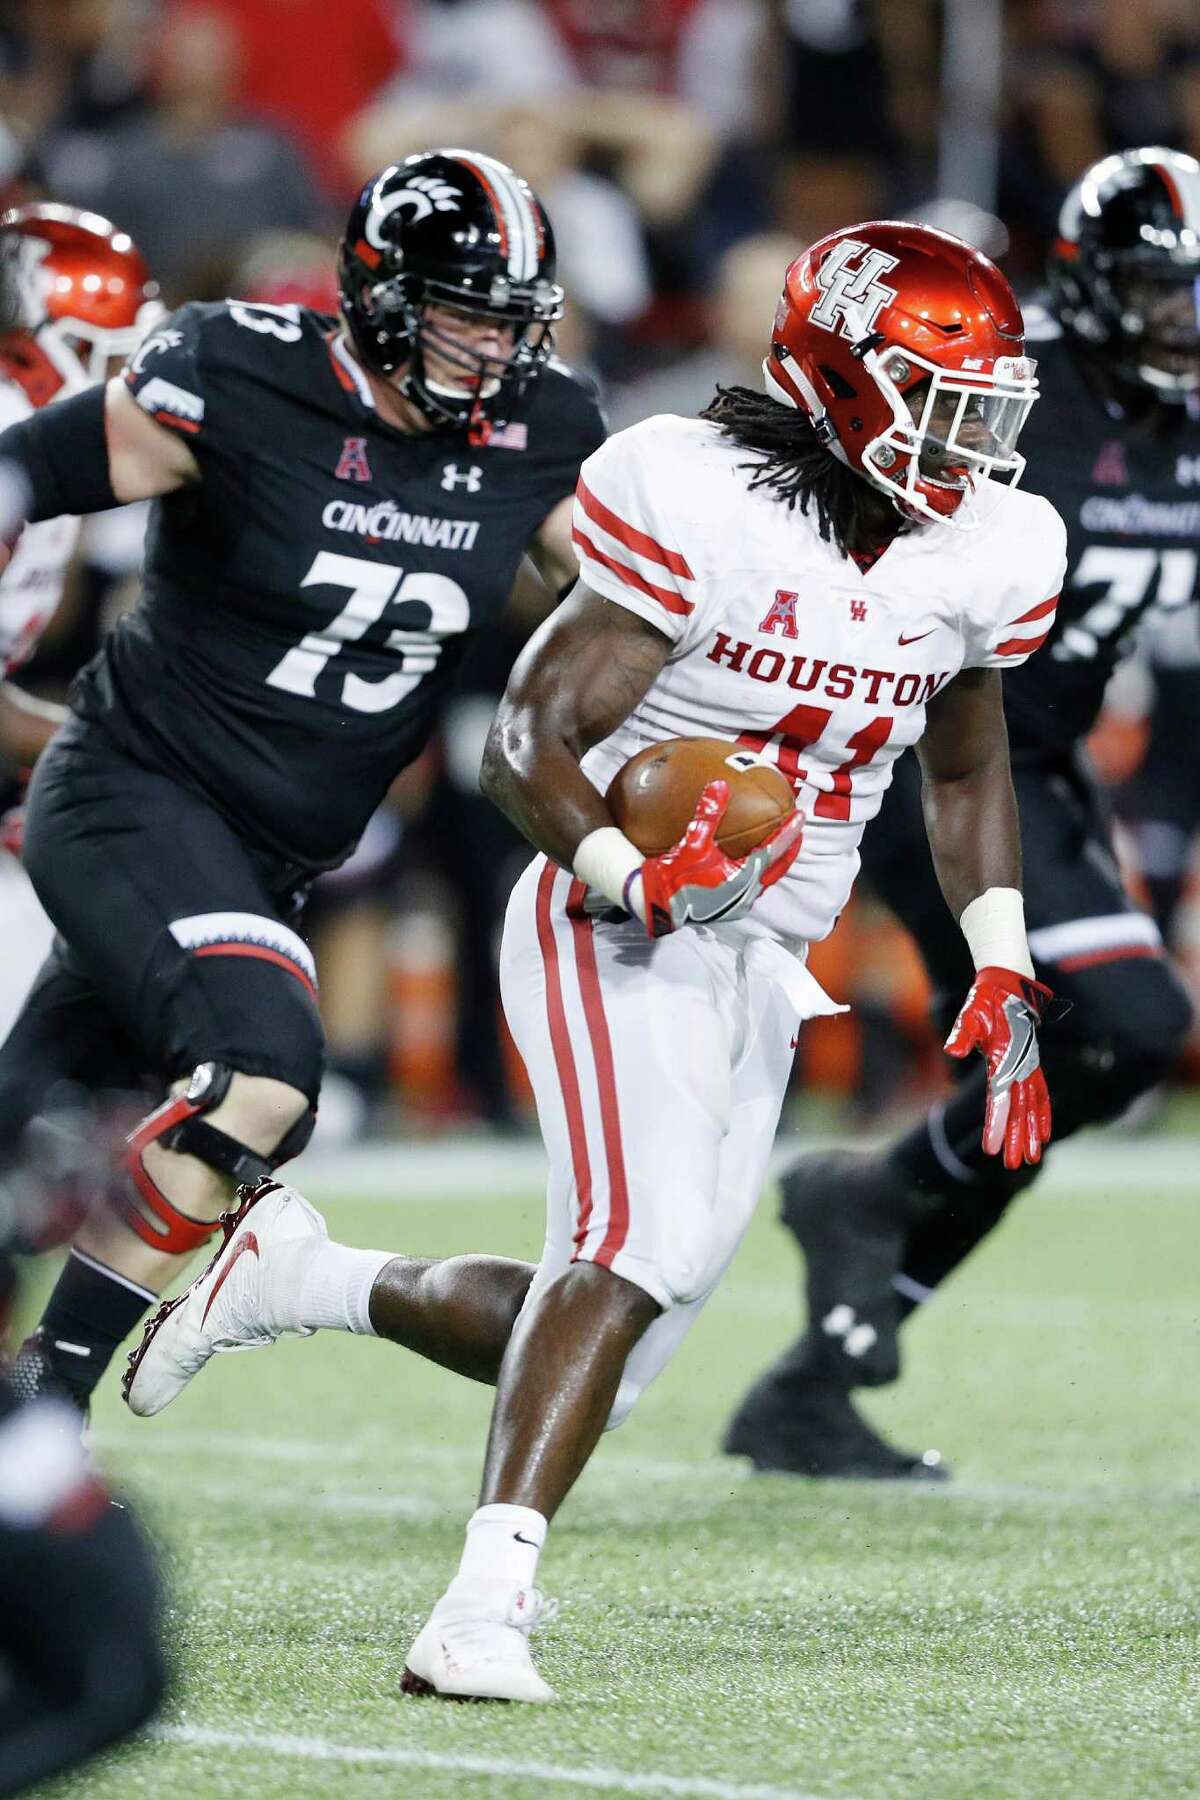 UH's Steven Taylor returns an interception 74 yards for a TD in the fourth quarter. It was the first of two in the quarter - Howard Wilson had the other.﻿